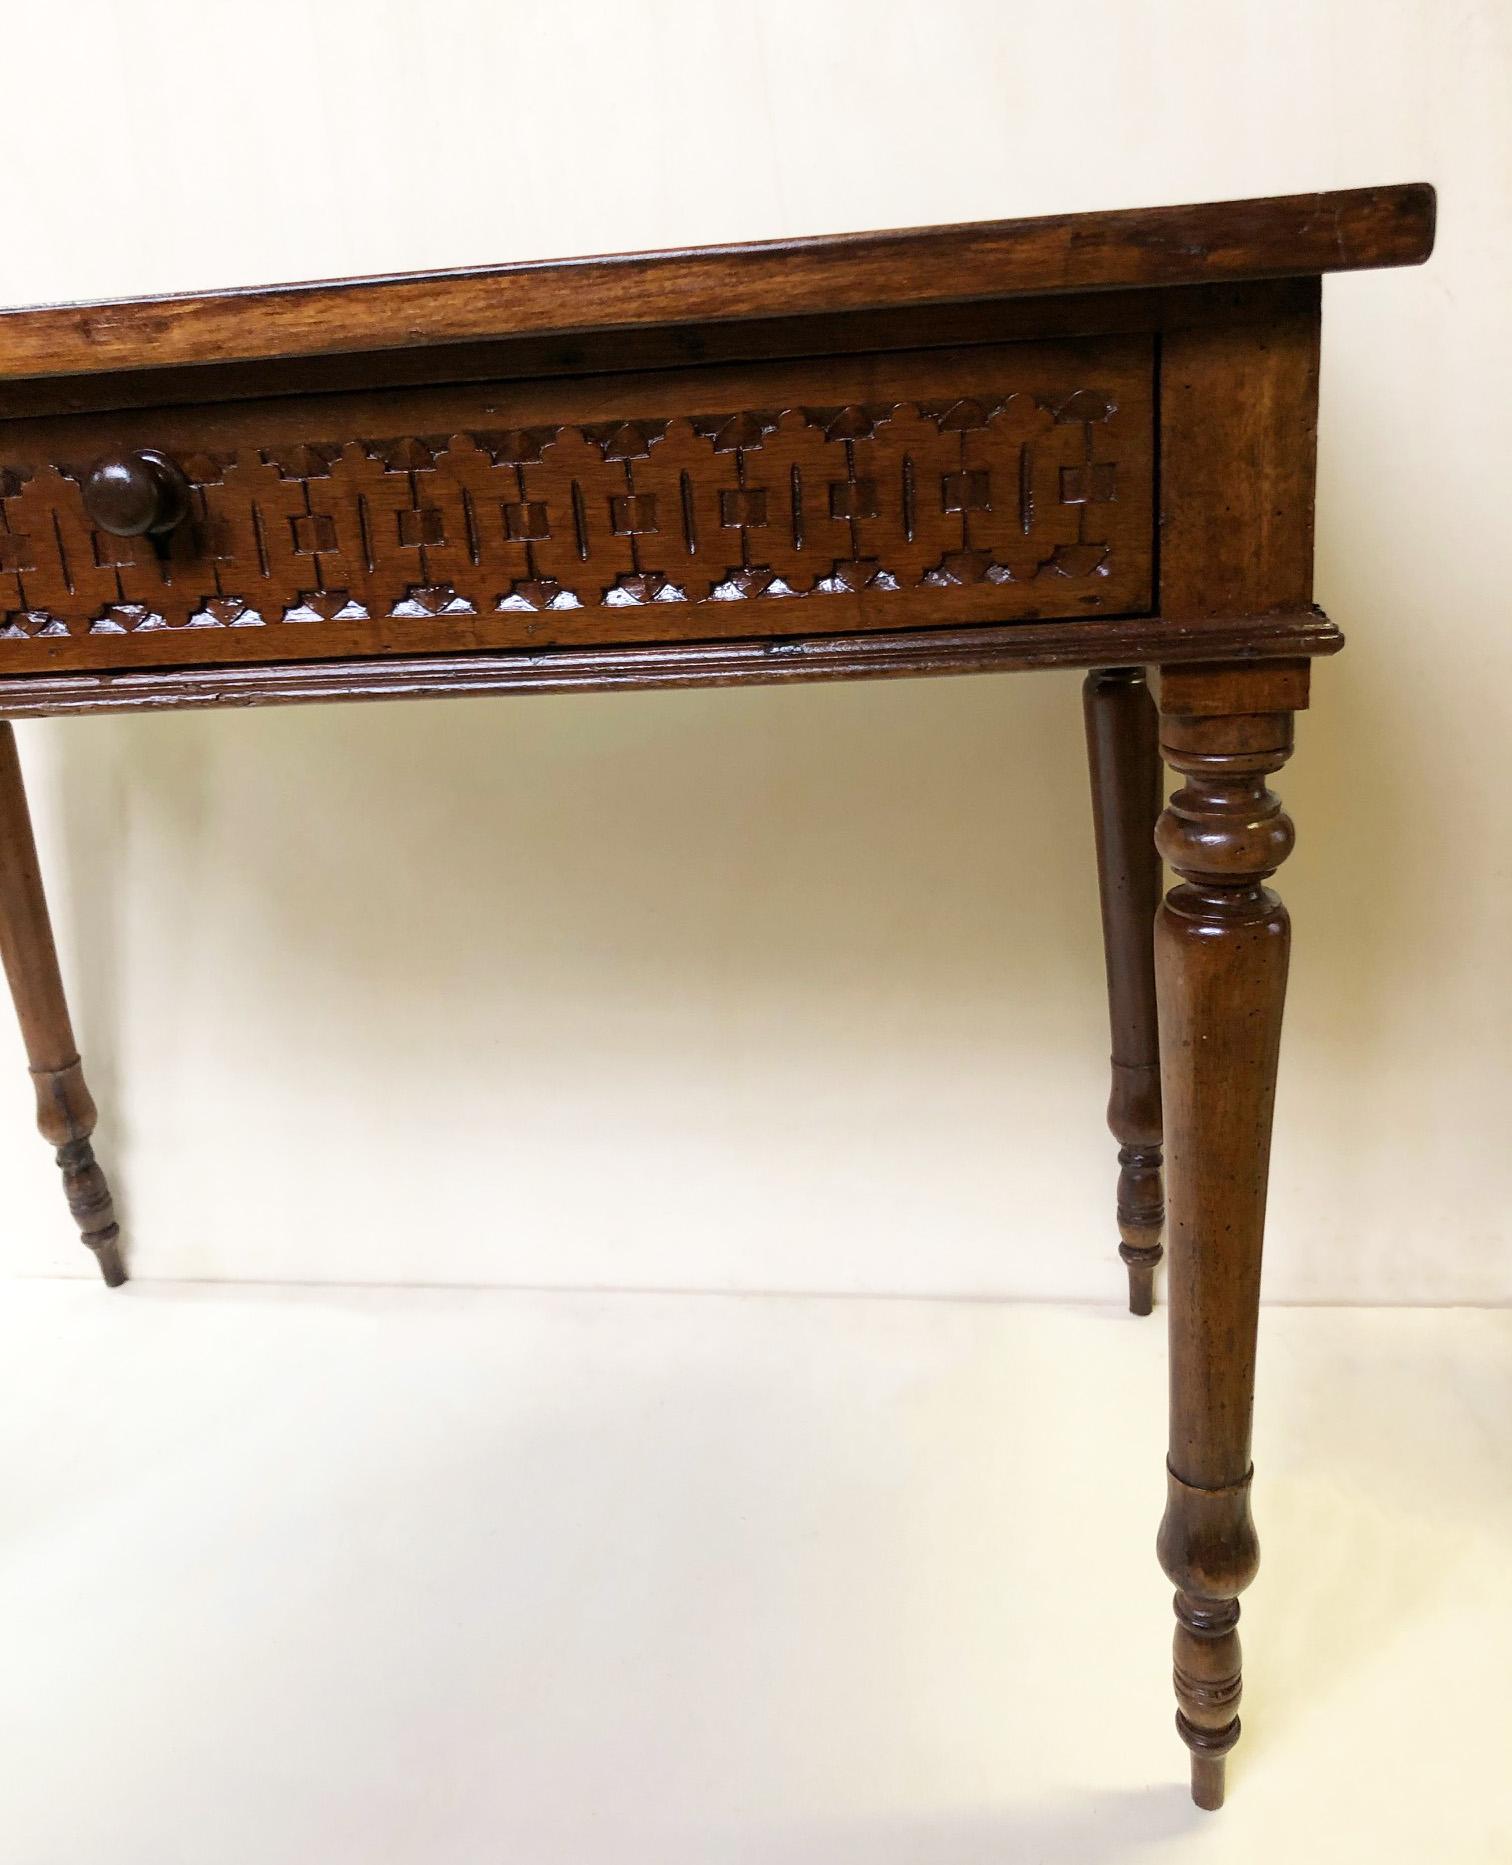 Original Italian Desk Table in Walnut with Perimeter Carvings from 1880 1